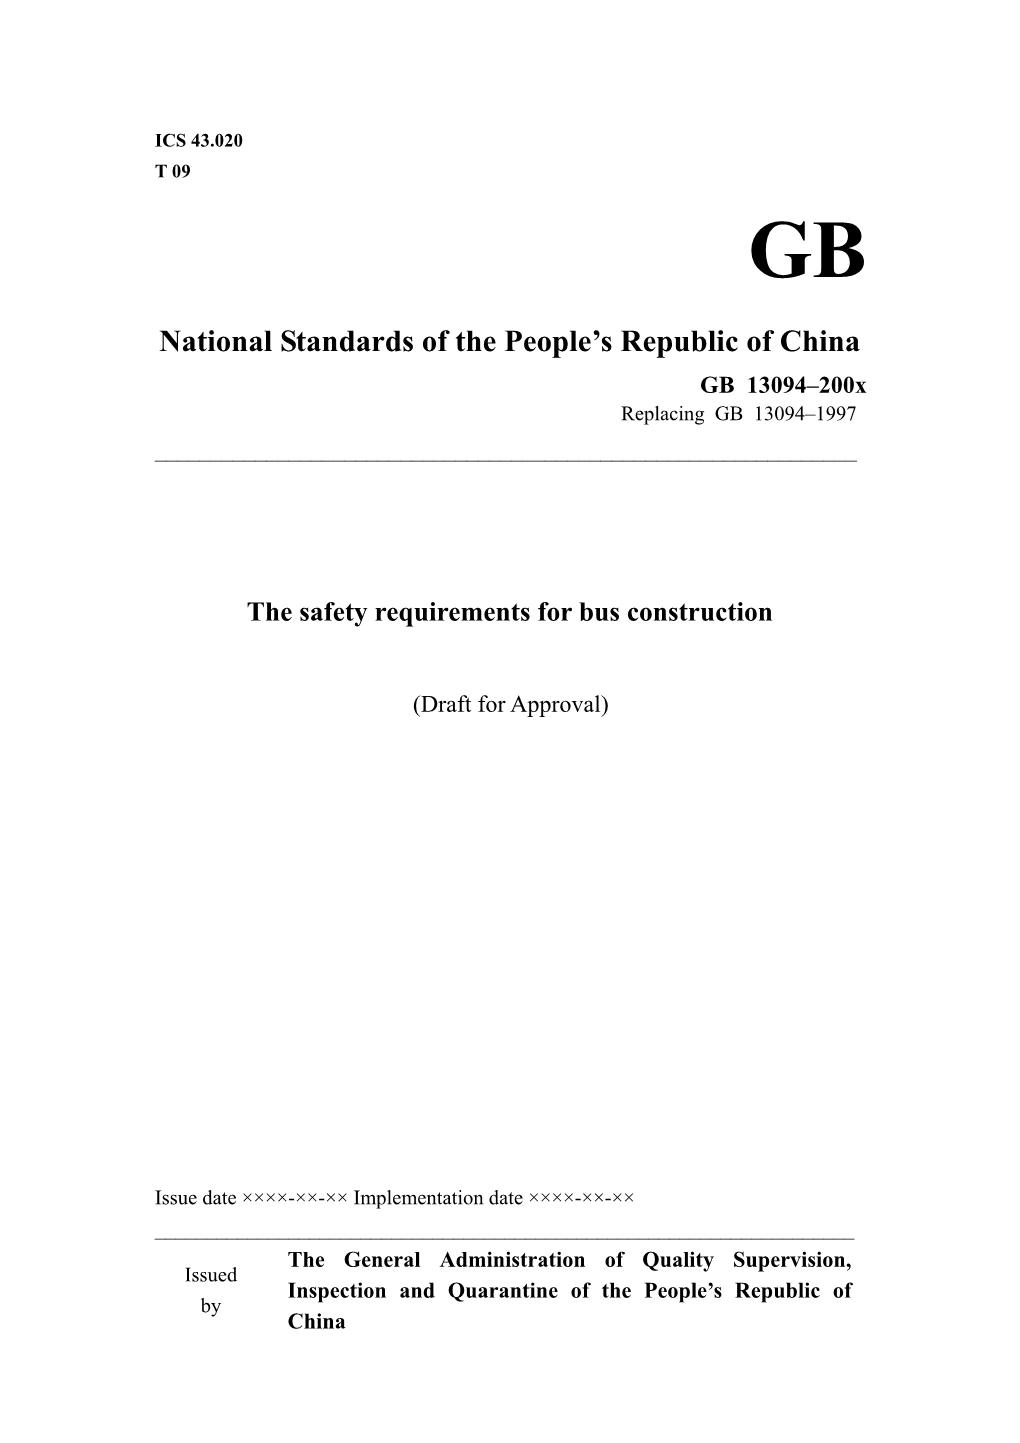 National Standards of the People's Republic of China